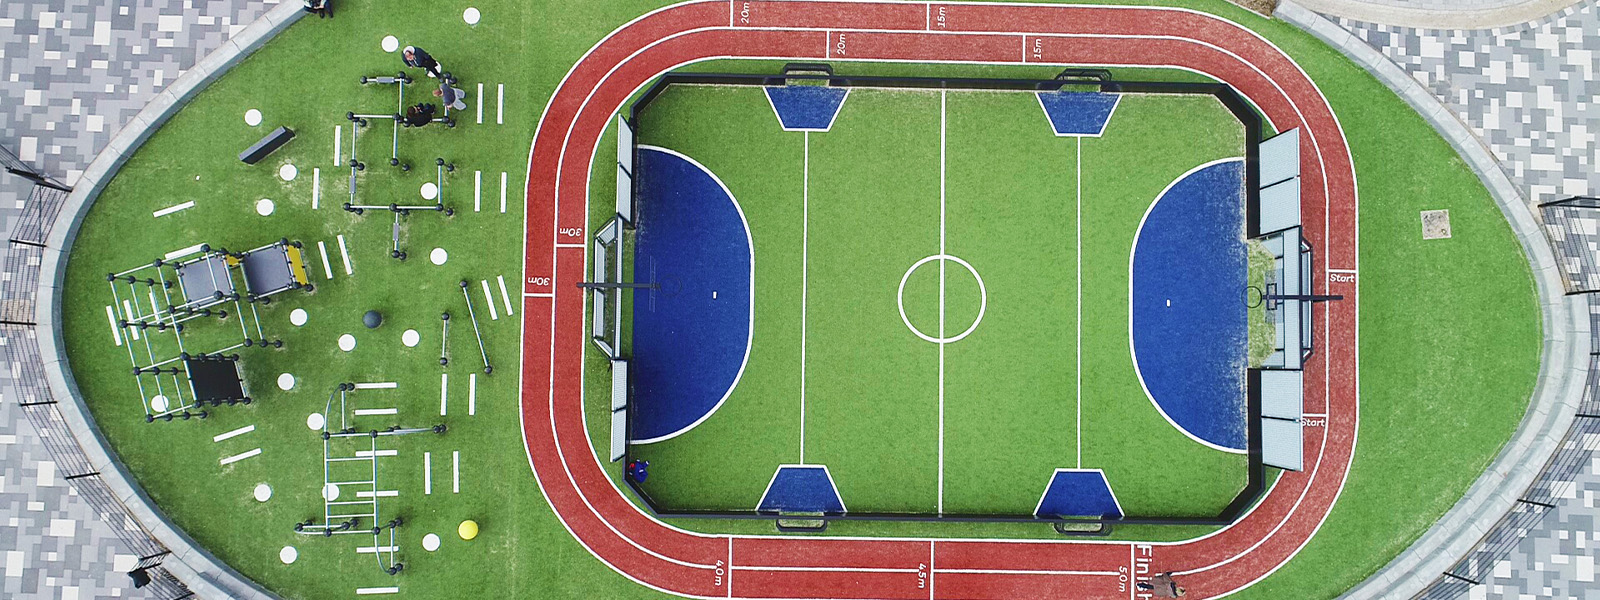 Aerial view of a sports complex featuring a green mini soccer field with blue goal areas, surrounded by a red running track. To the left, there is outdoor gym equipment, and the area is paved with grey patterned tiles.